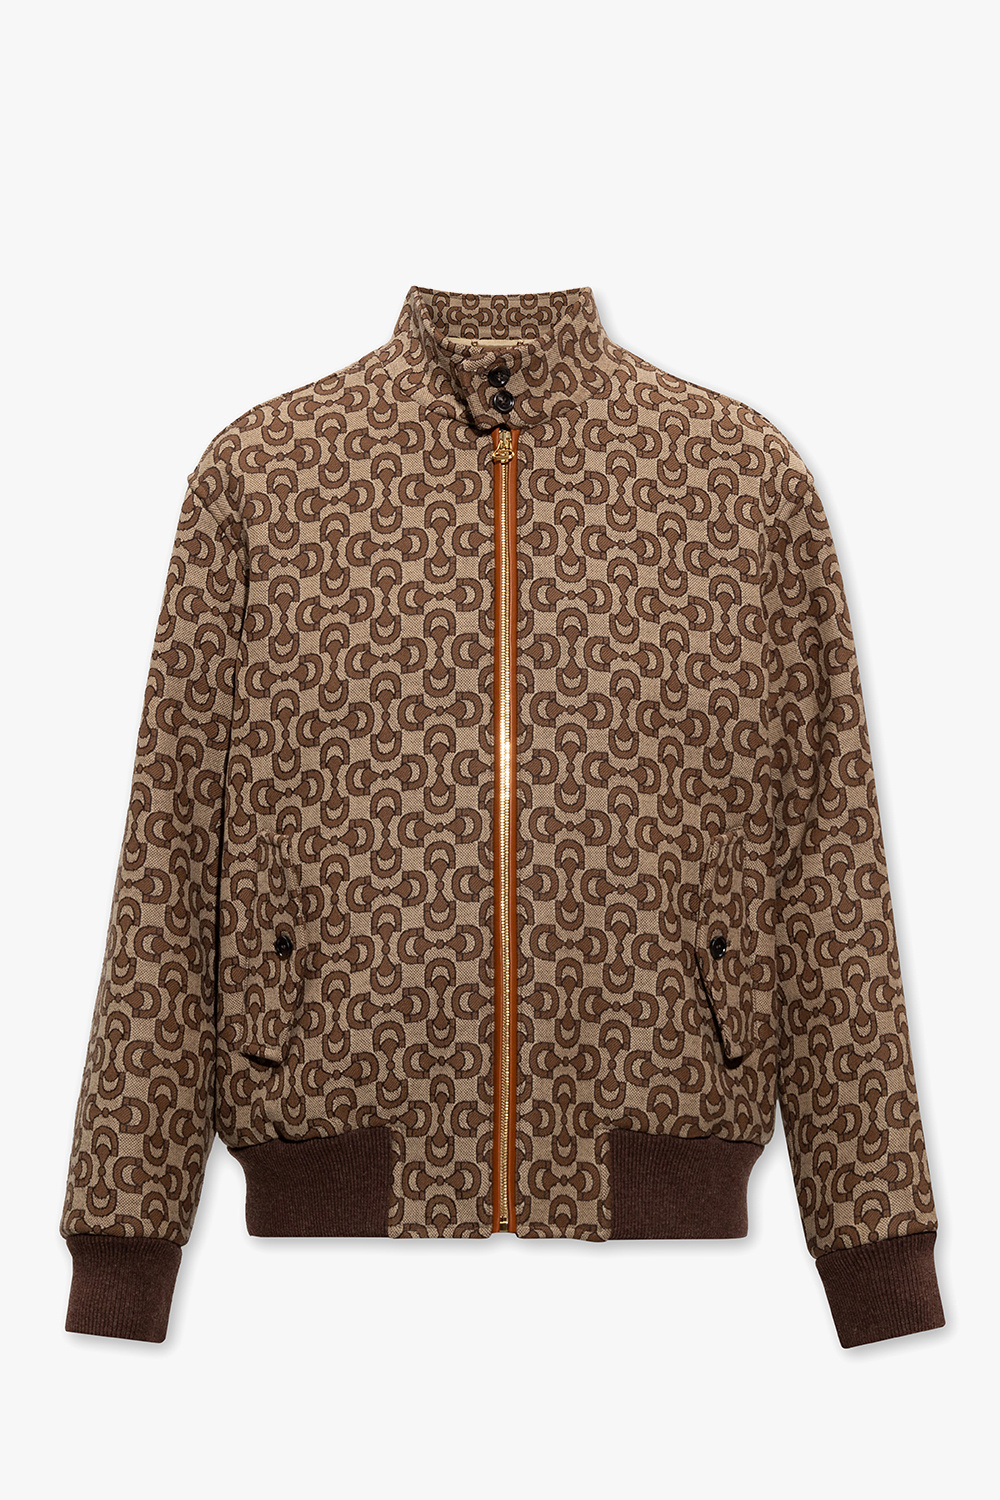 Gucci Wool jacket with standing collar